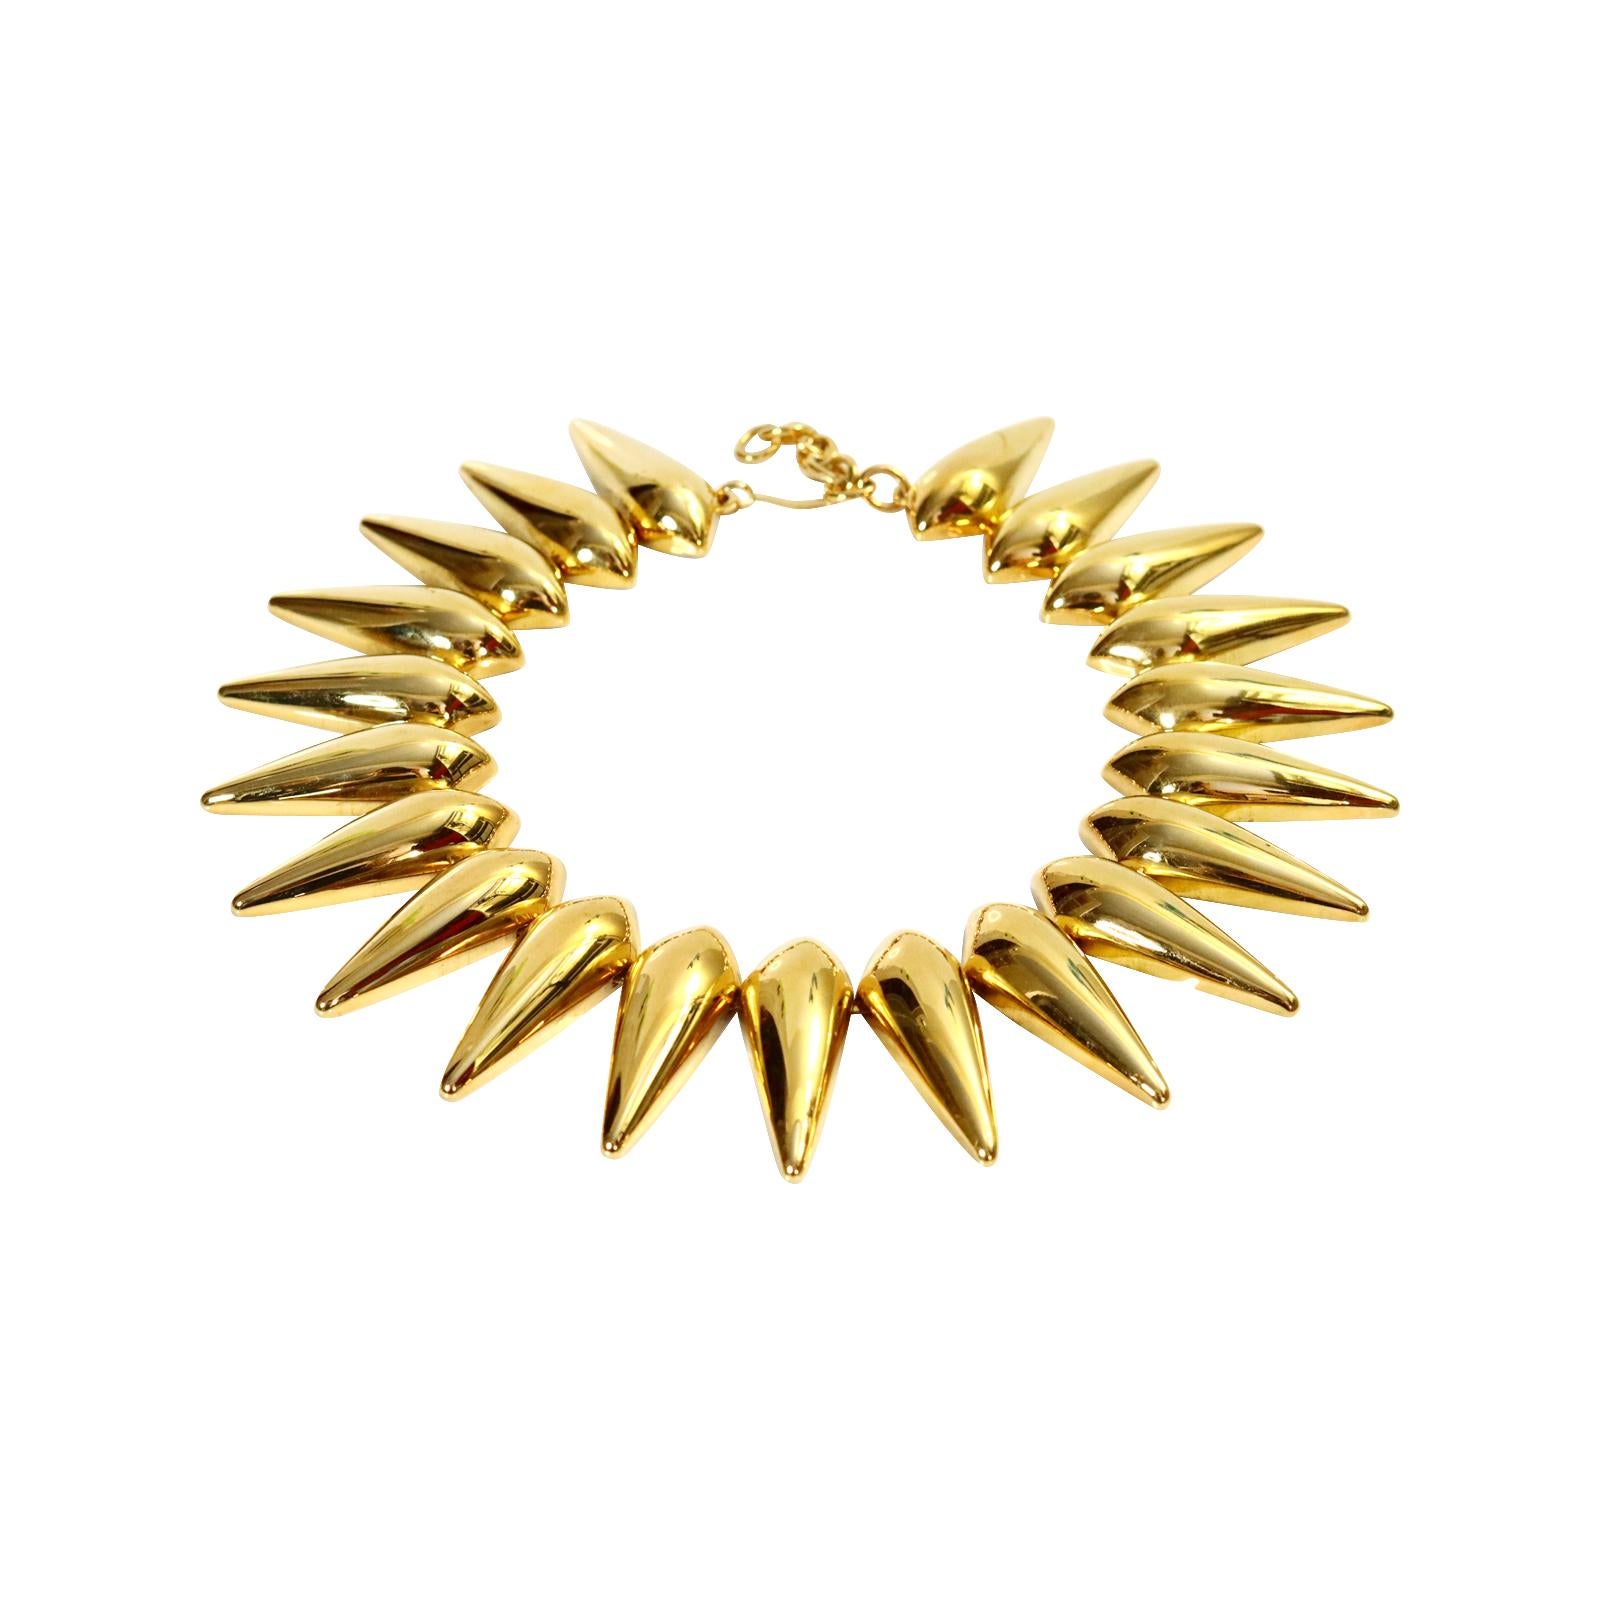 Vintage Monet Spiky Gold Tone Necklace Circa 1970s For Sale 1